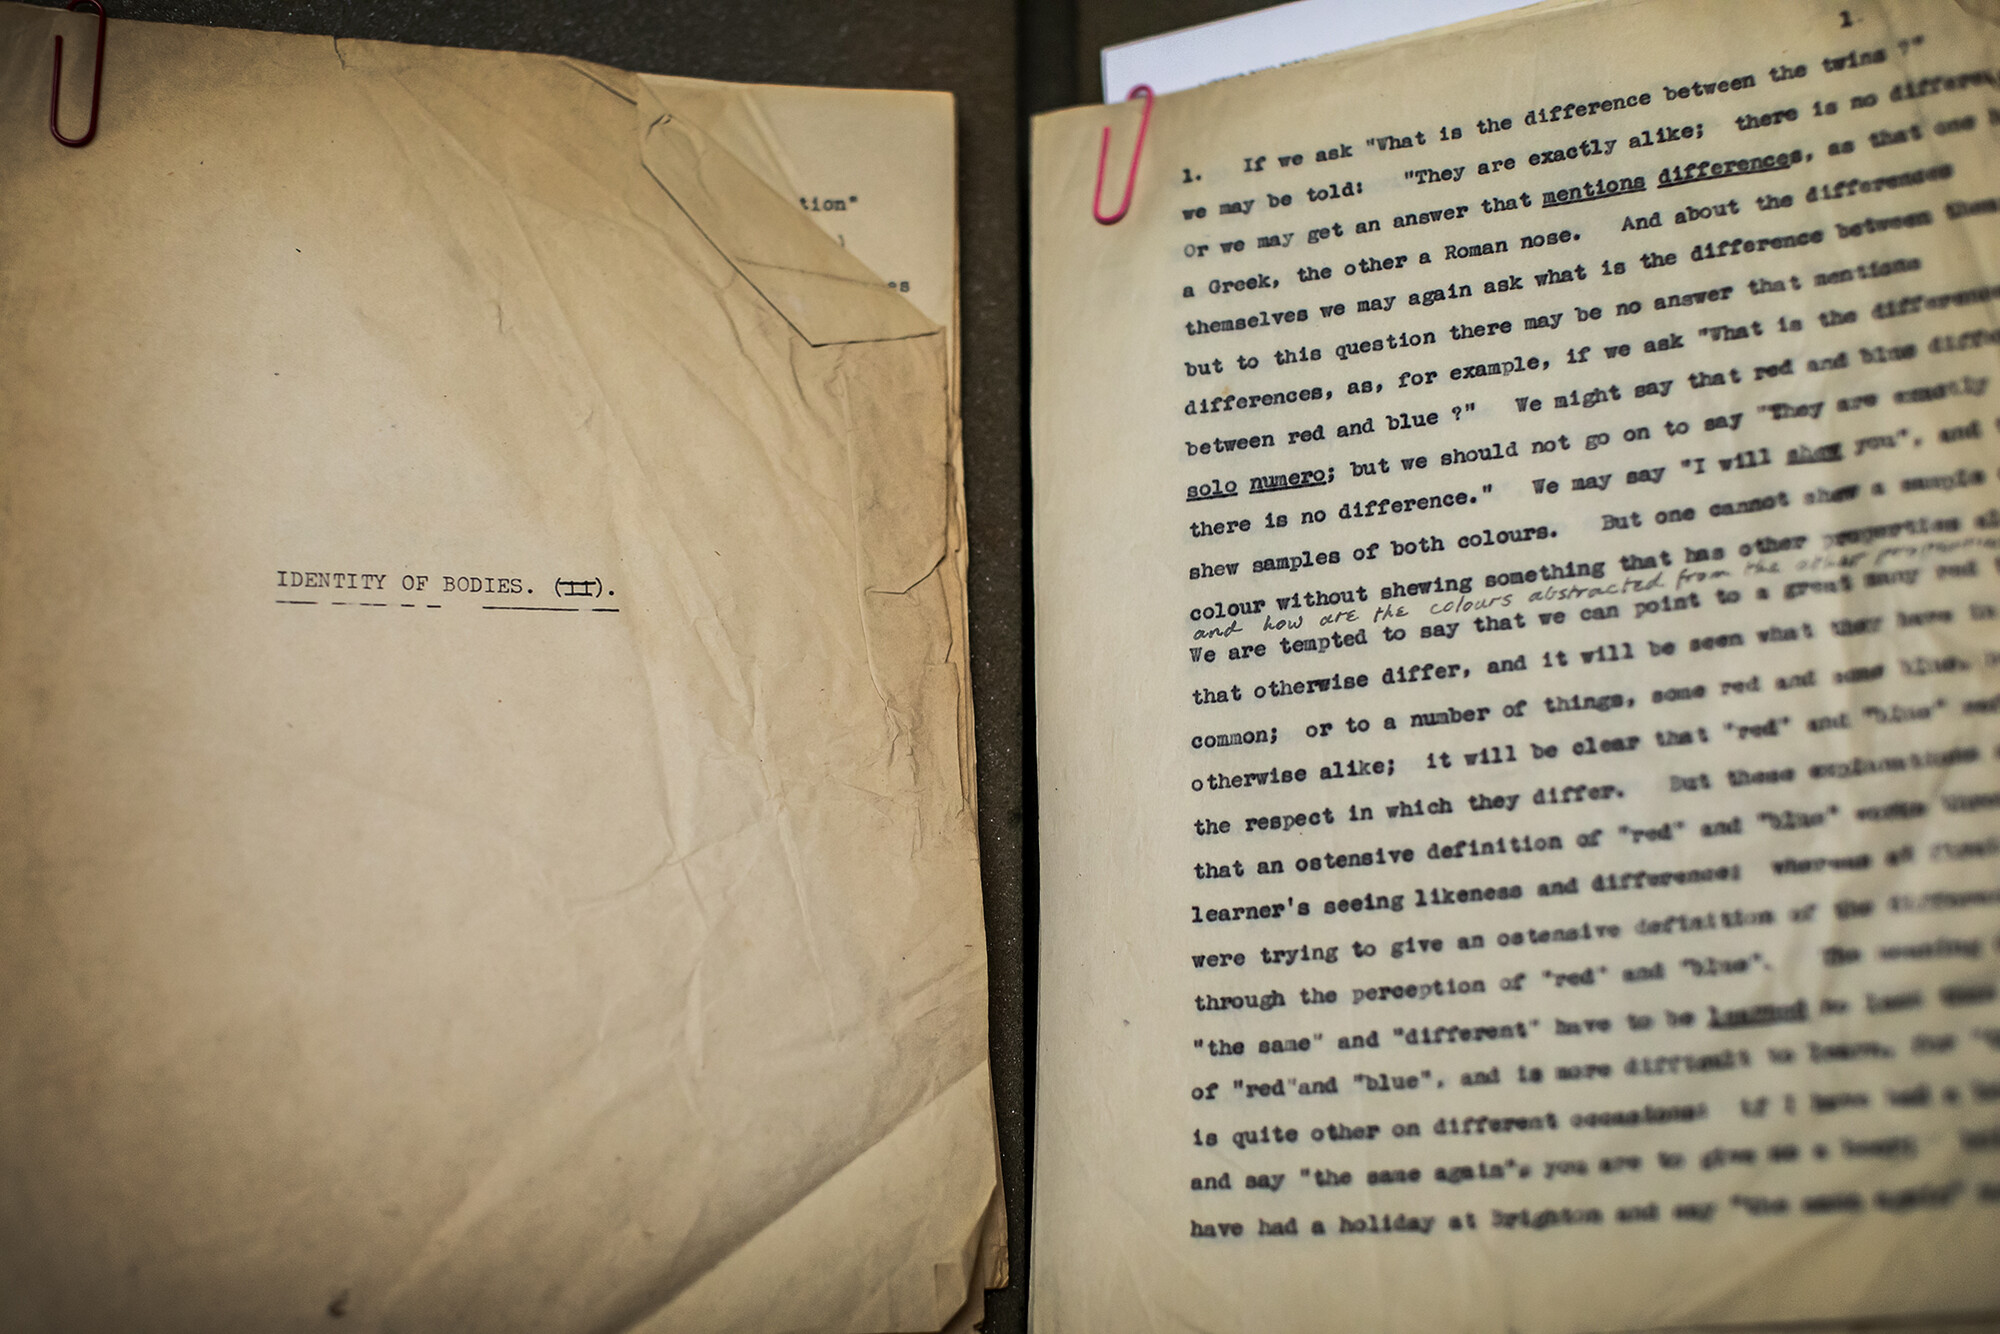 Weathered document produced on a typewriter. The page on the left reads "Identity of bodies." The page on the right is a full page of text.